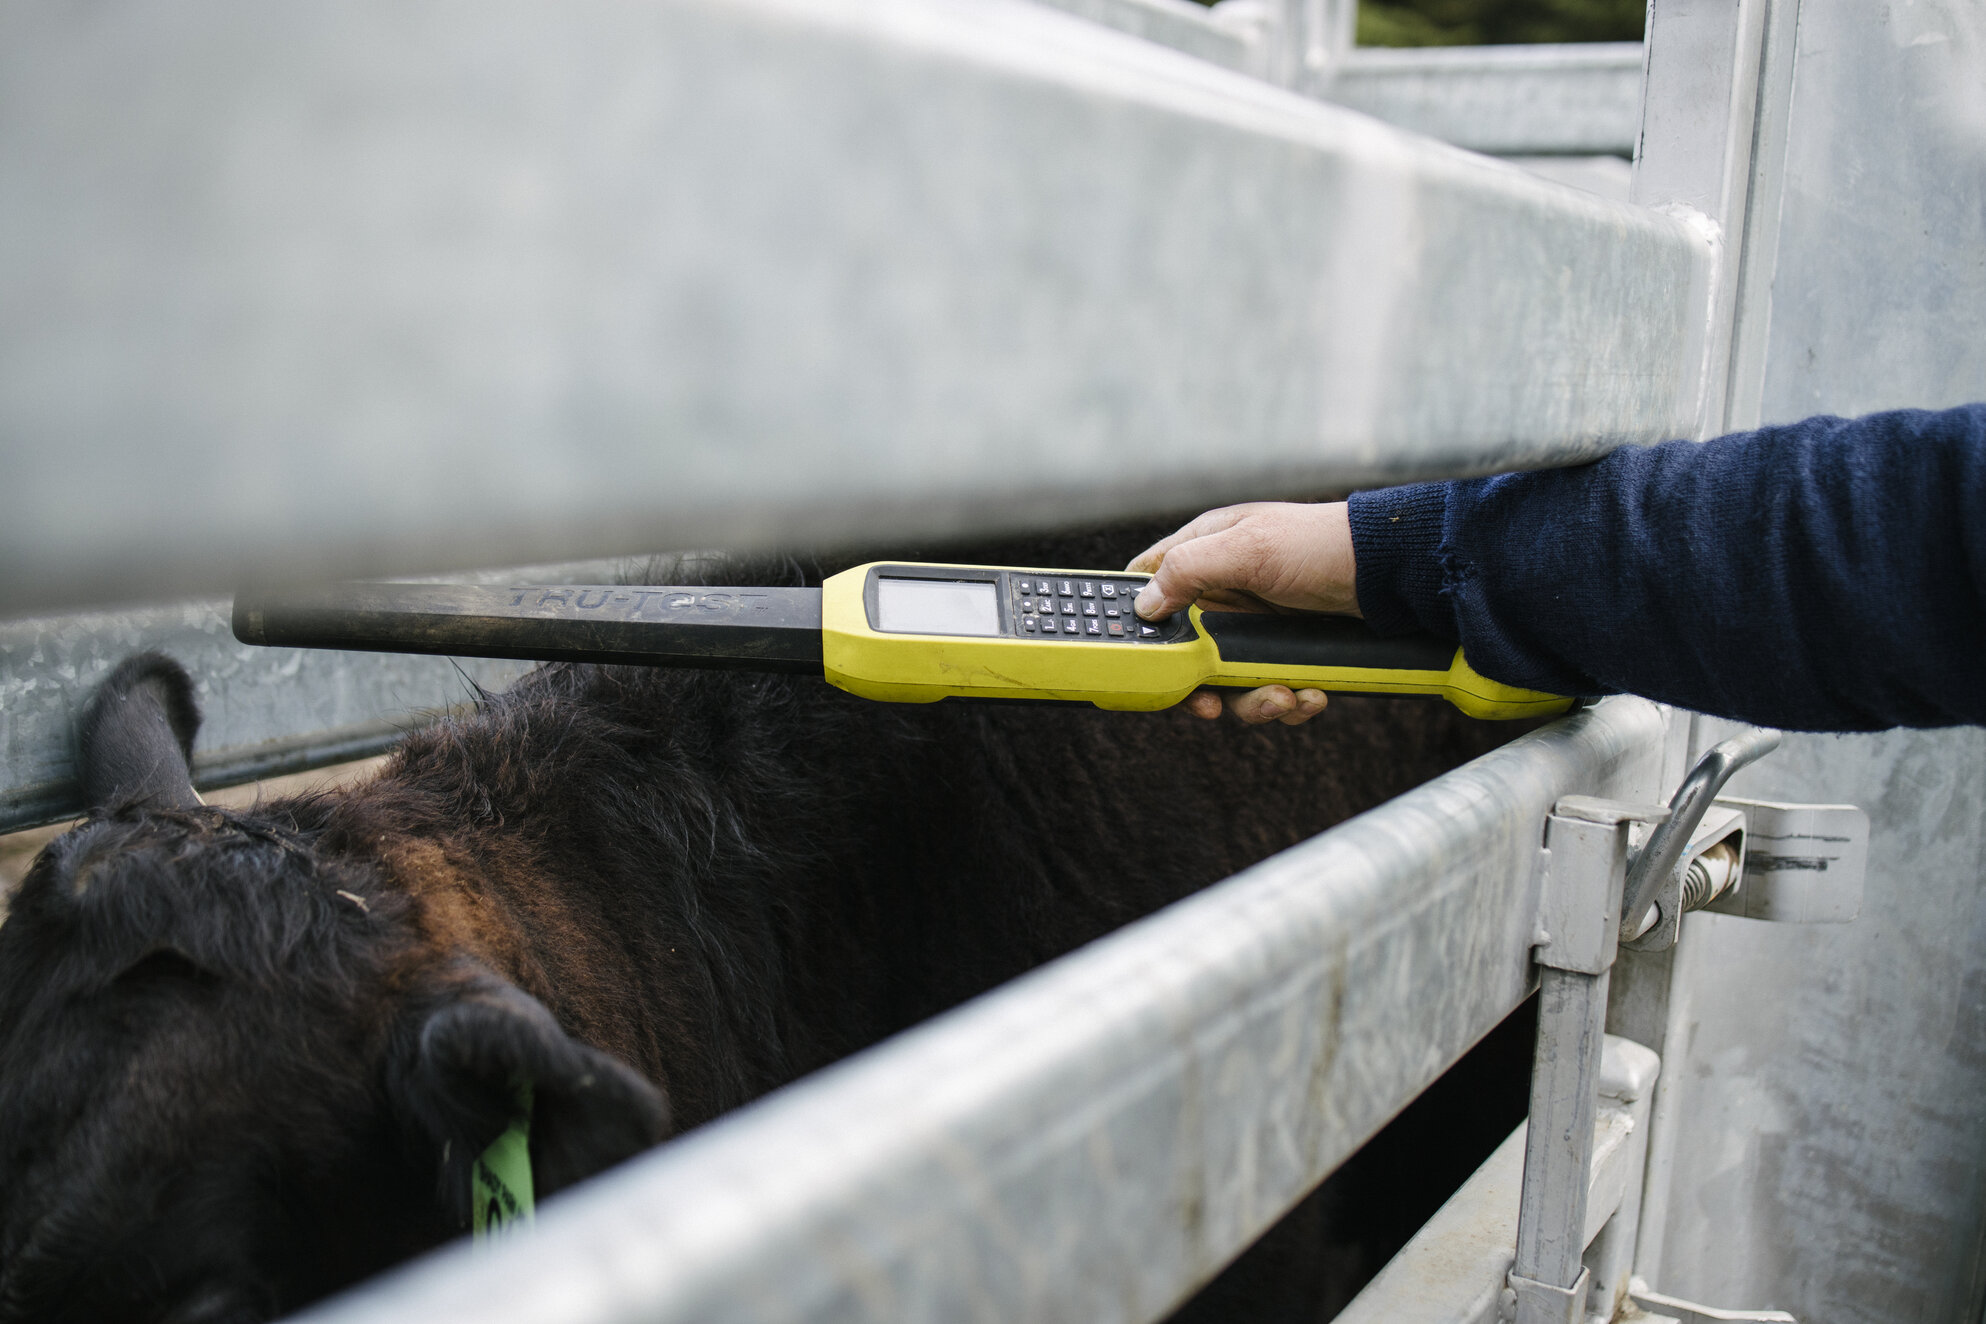 Reliable and User-friendly Solutions Keeps Farm on Track Case Study